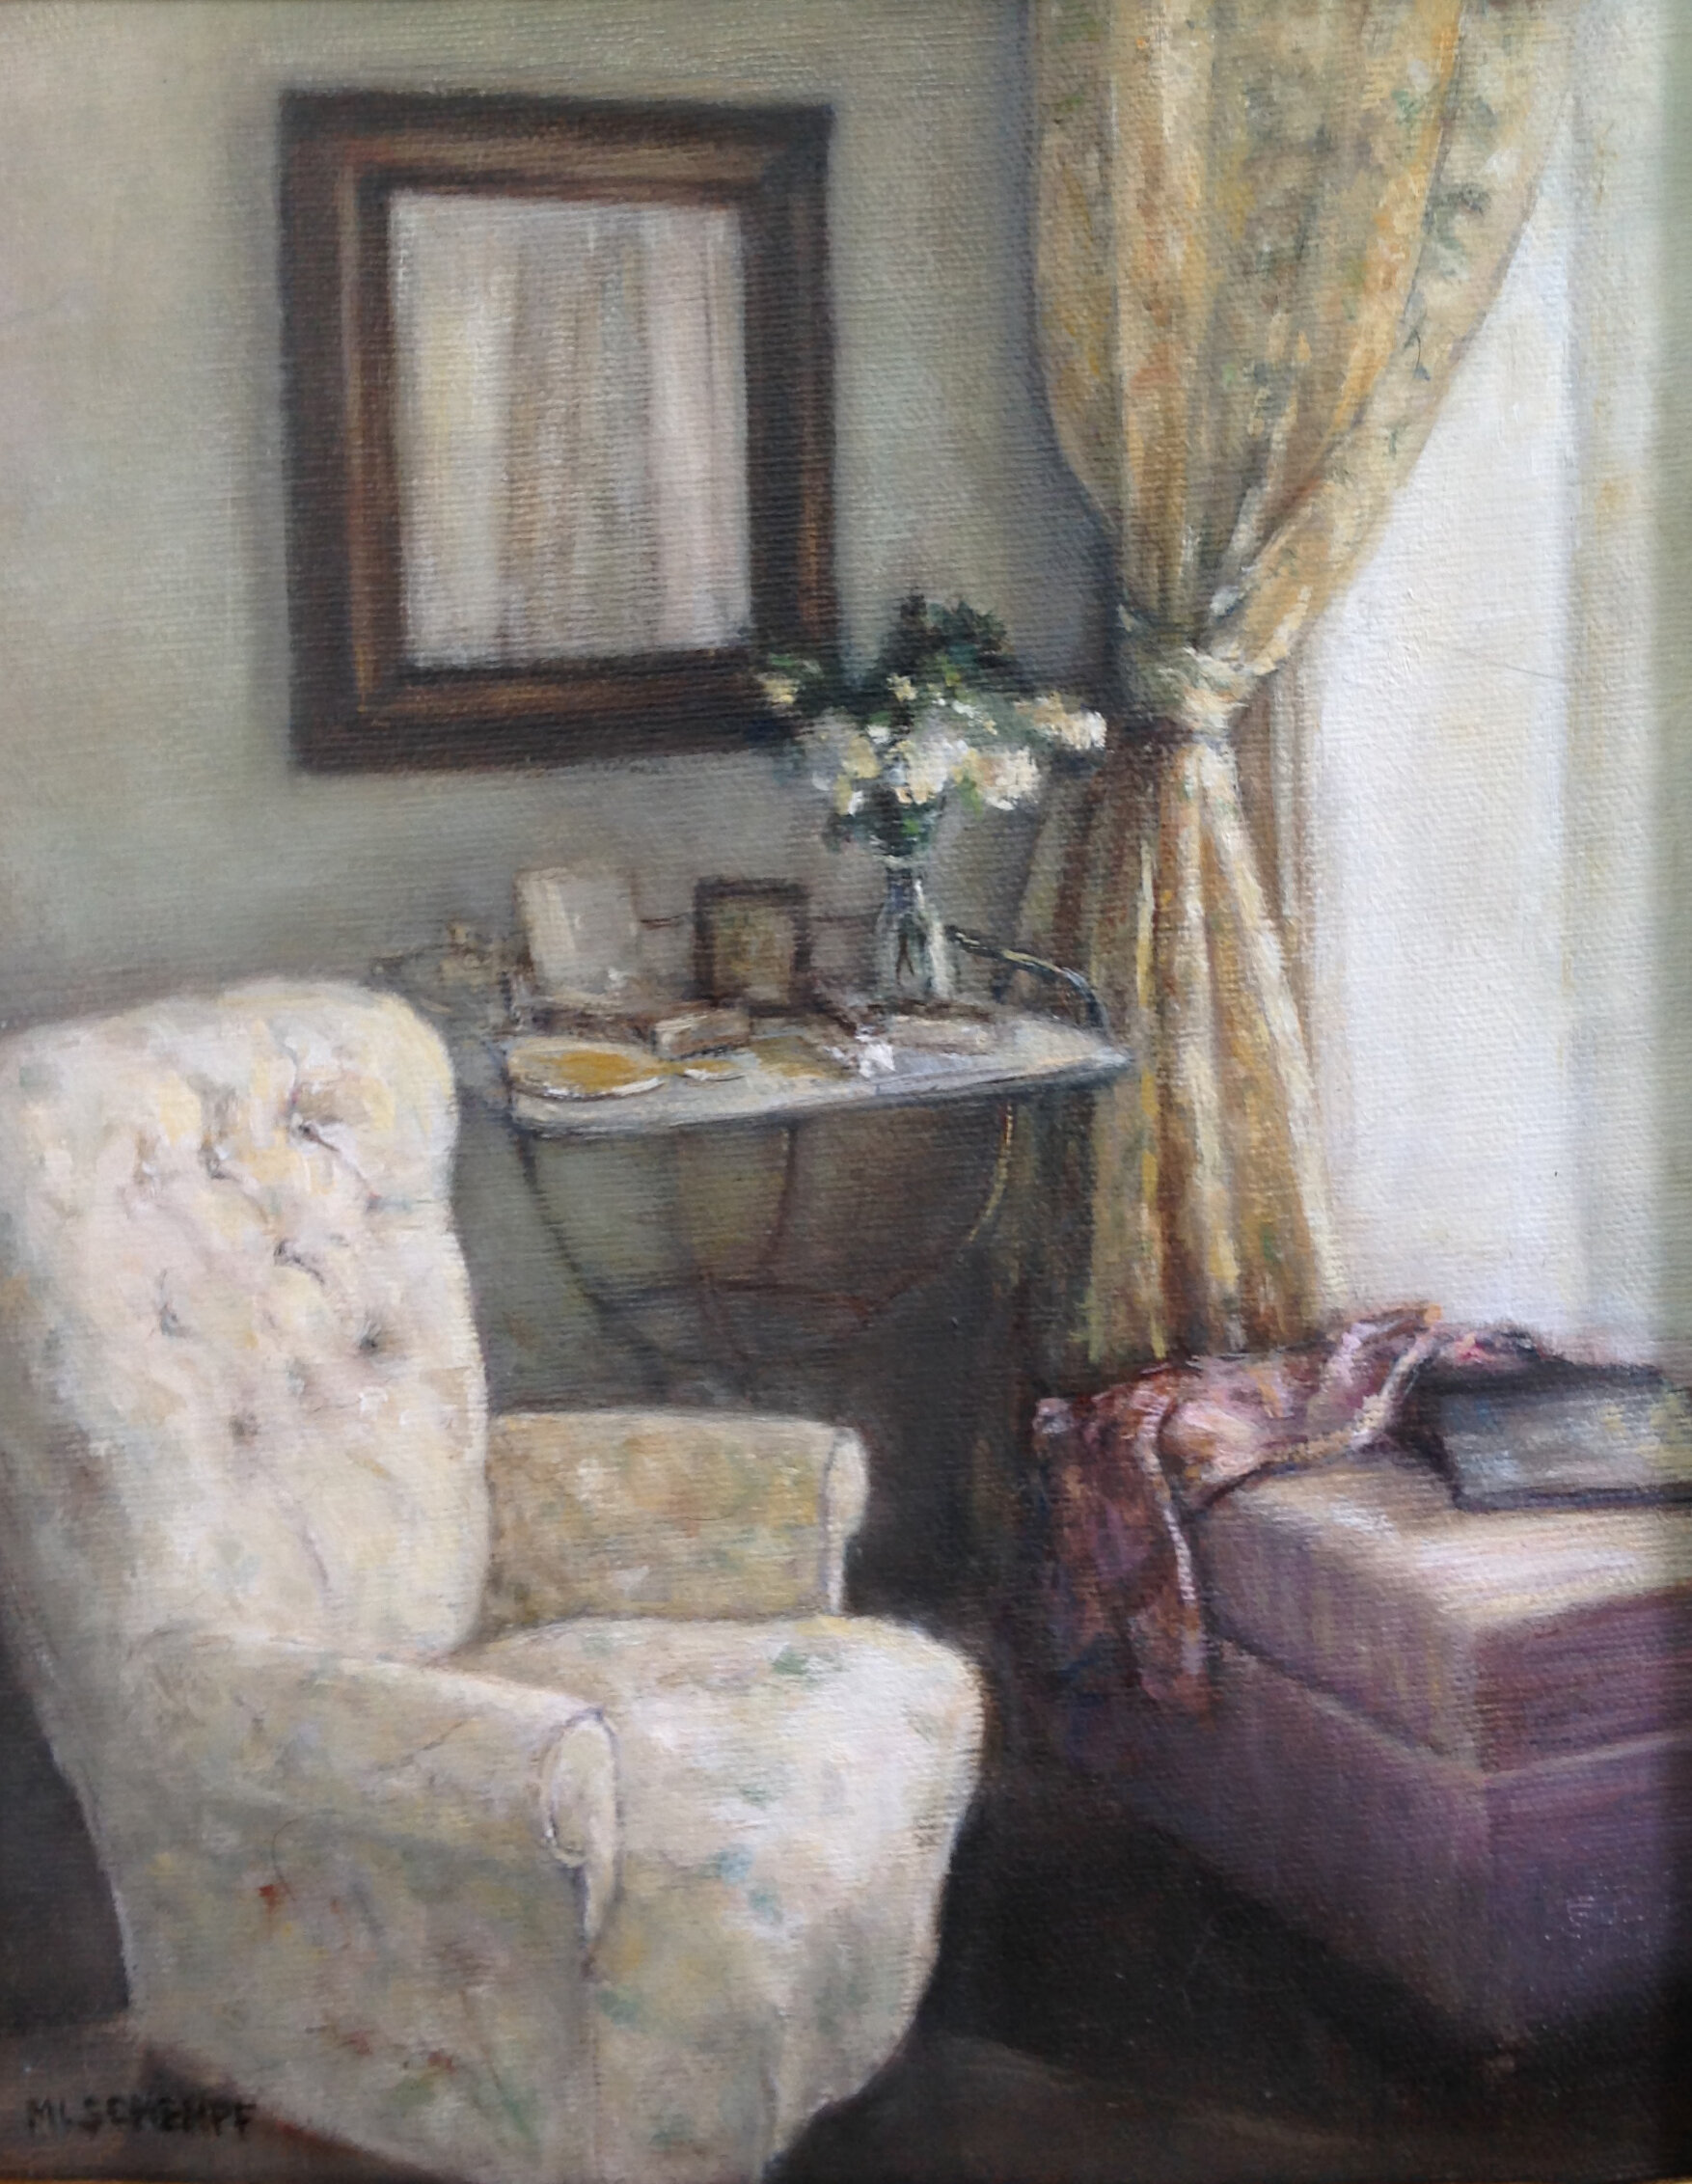   Mary Lou Schempf   Interior with Chair,  8” x 10”, oil on canvas  (private collection)  